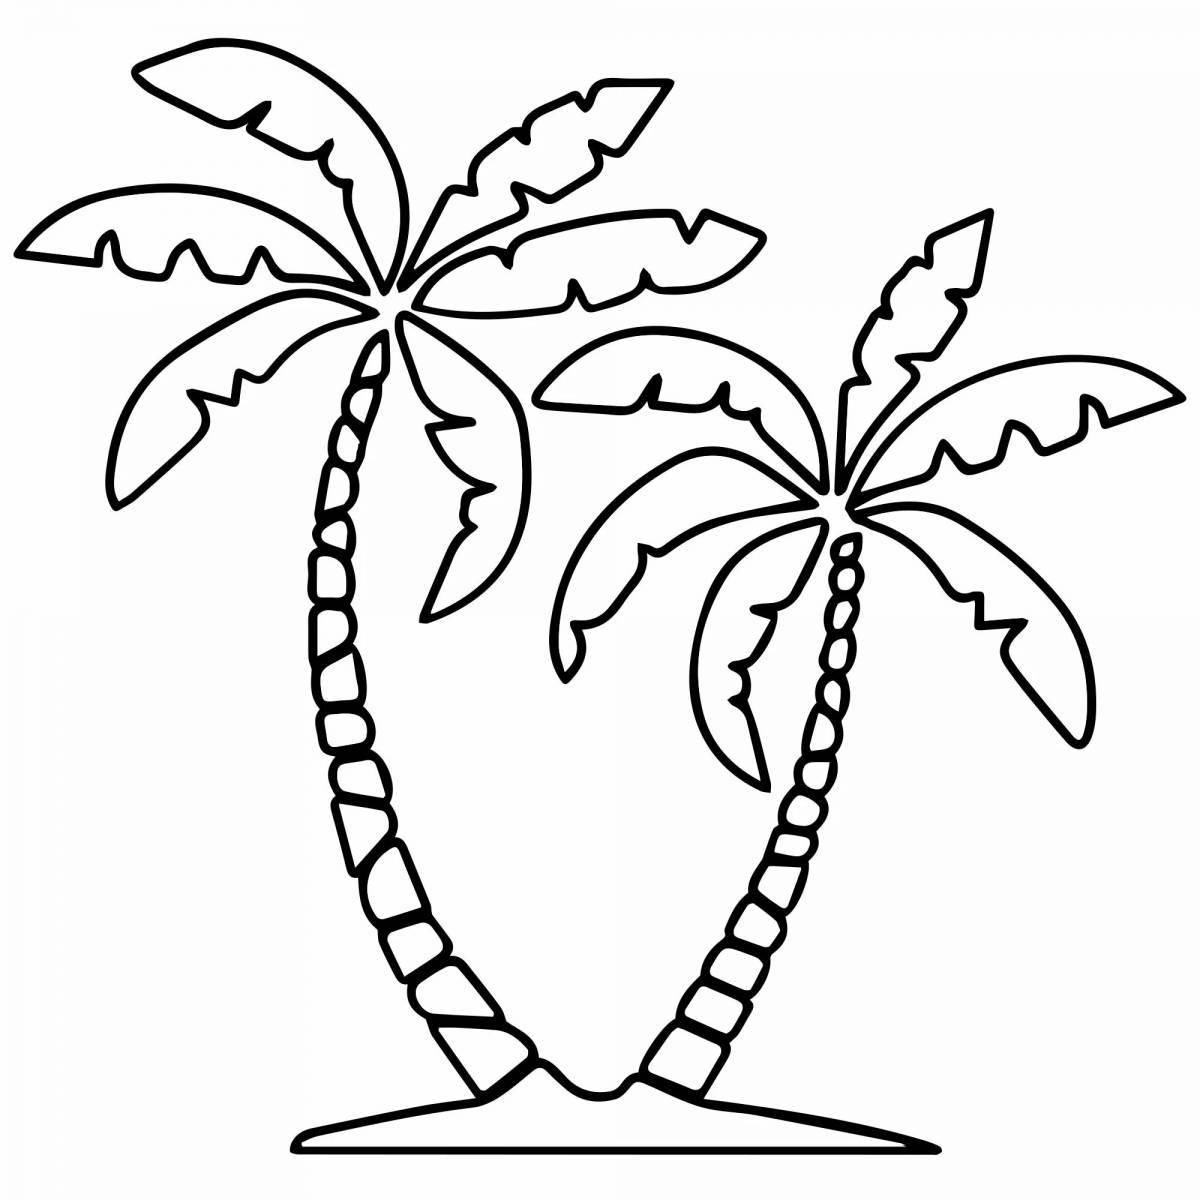 Coloring nice palm tree for kids